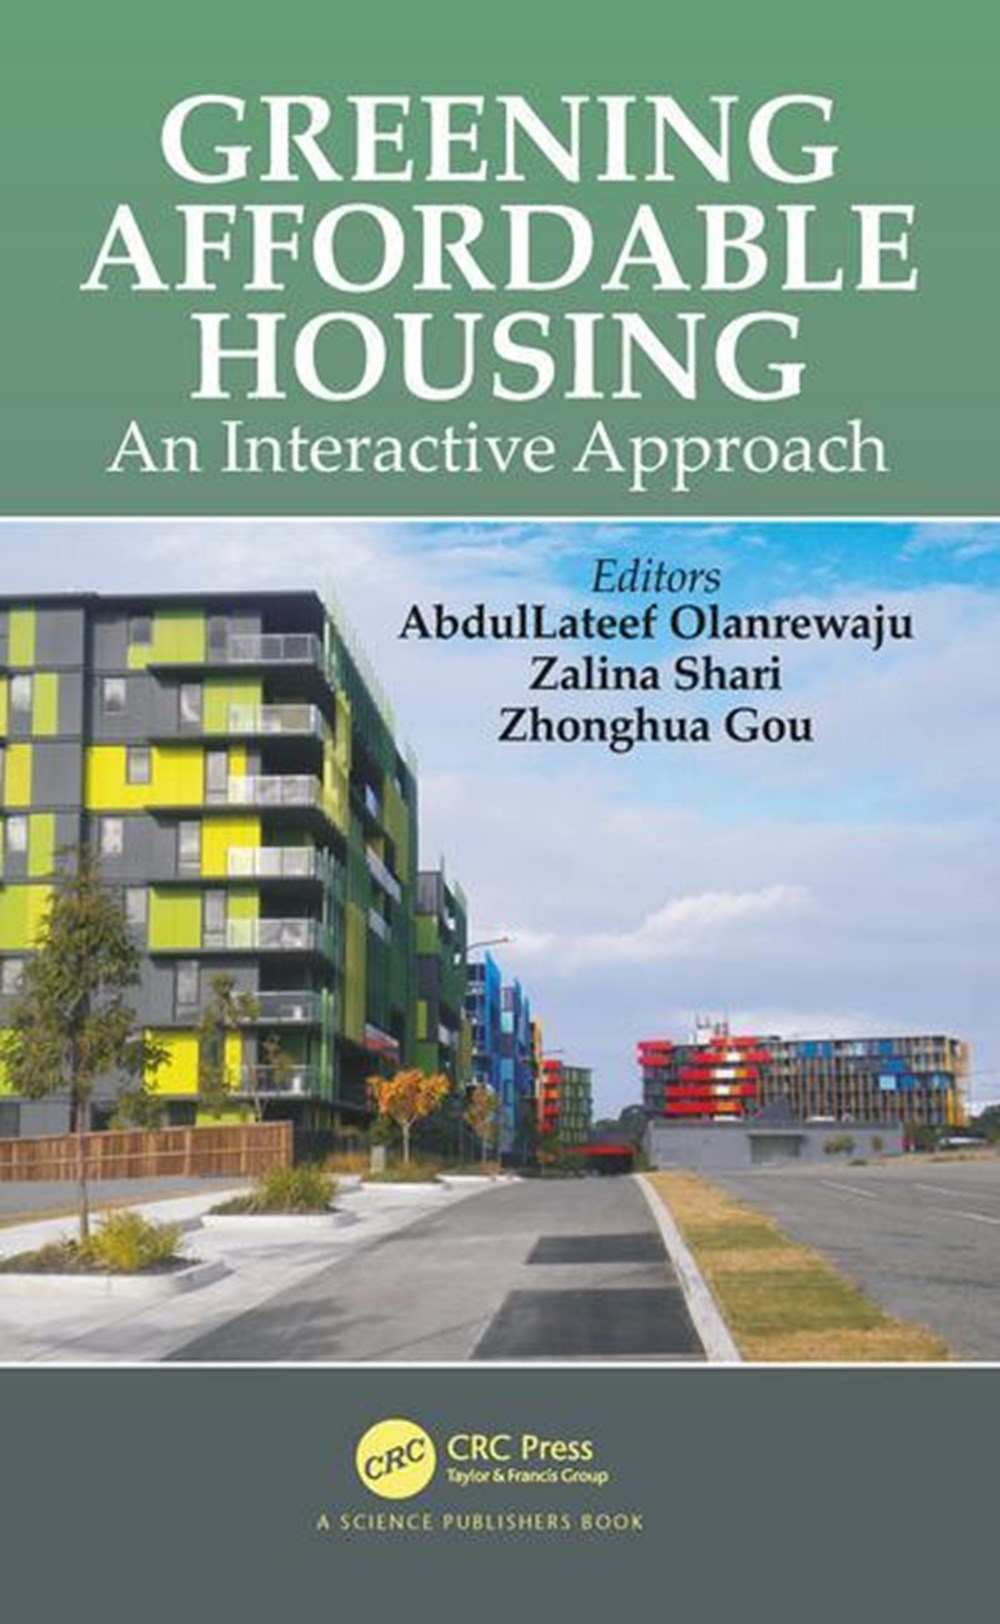 Greening Affordable Housing: An Interactive Approach